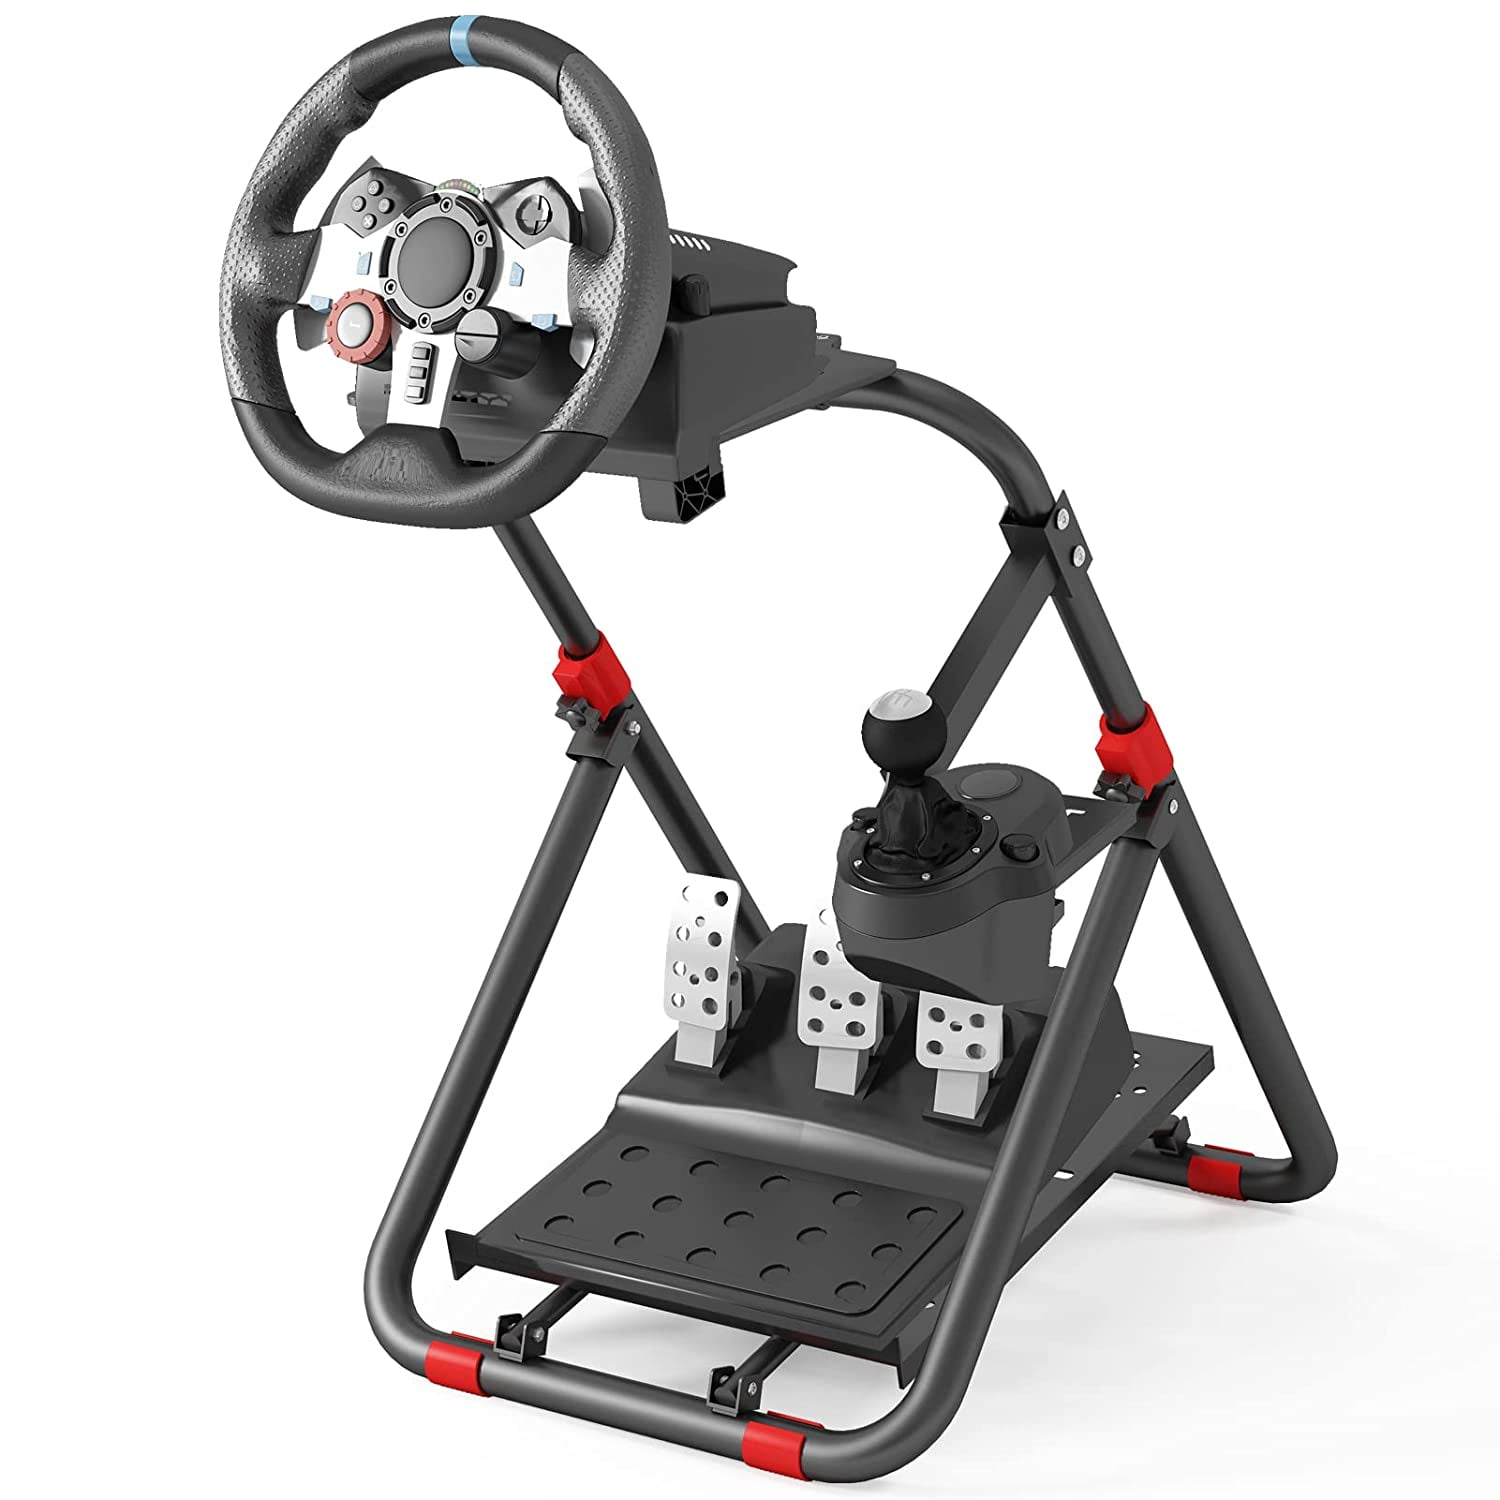 guvsoets Racing Steering Wheel Stand Collapsible Tilt-Adjustable Racing Stand for G920 G29 G923 Supporting Thrustmaster T248X T248 T300 T150 458 TX Xbox PS5 PC - Walmart.com